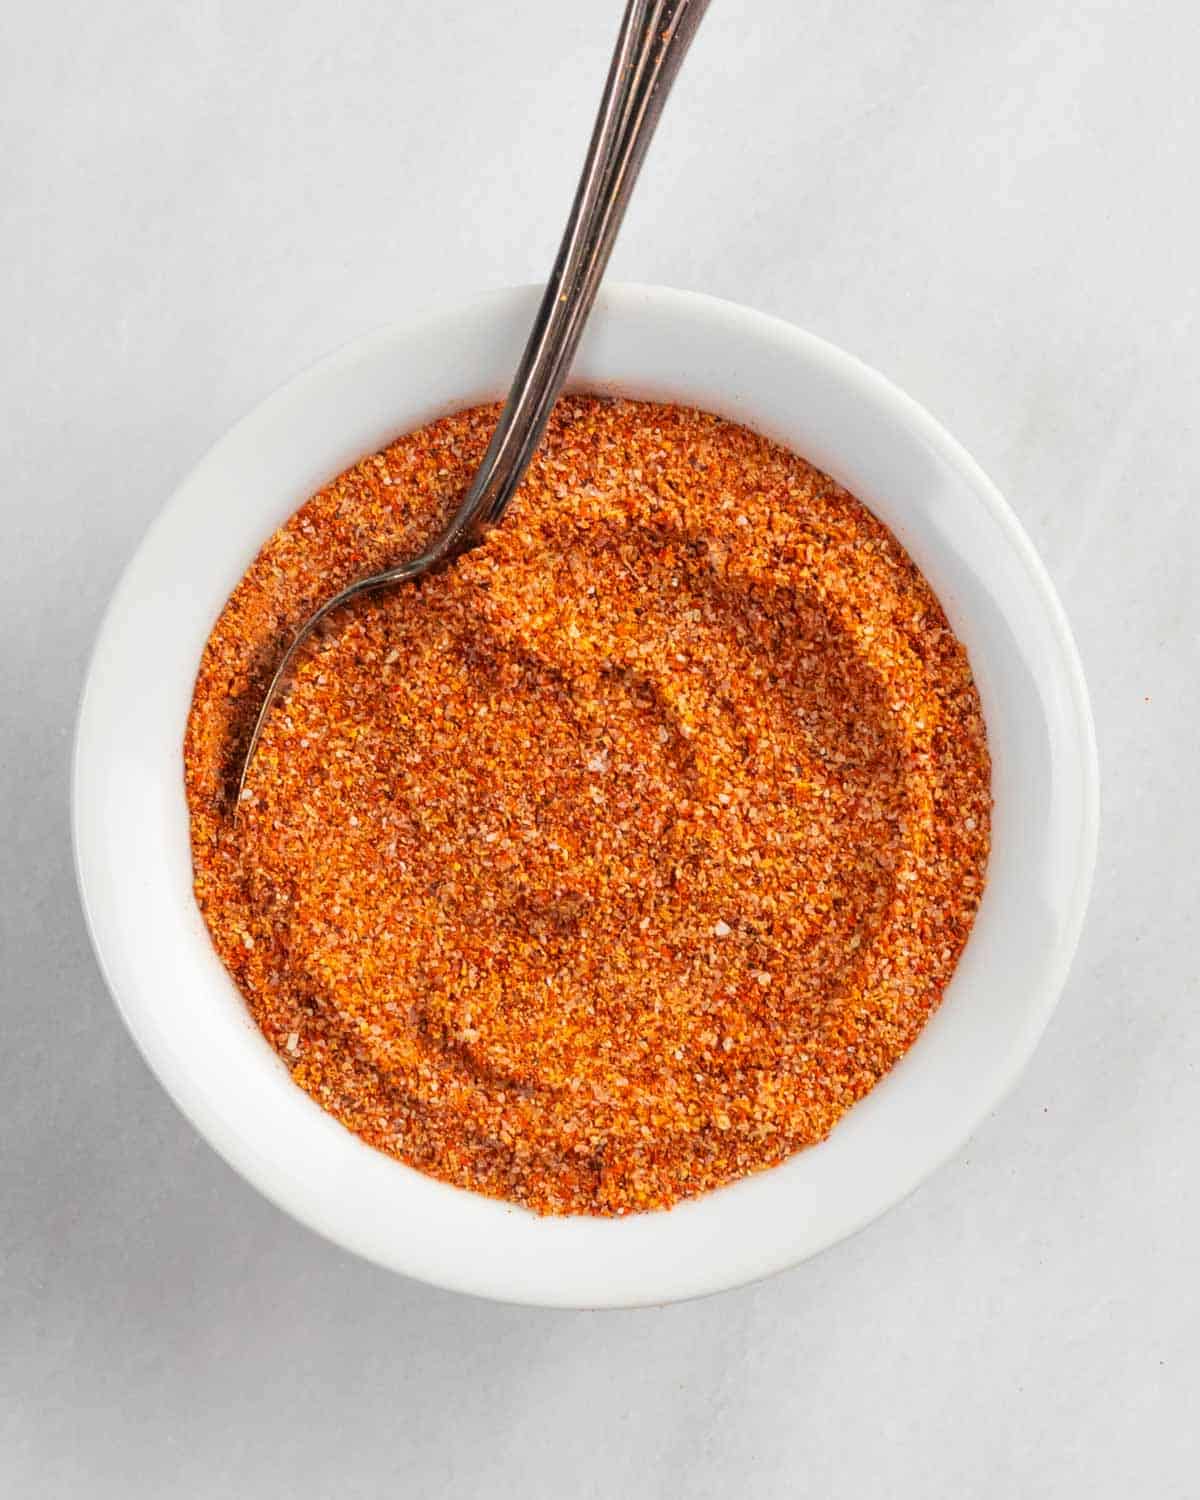 Buffalo rub for chicken in a small white bowl with a spoon.